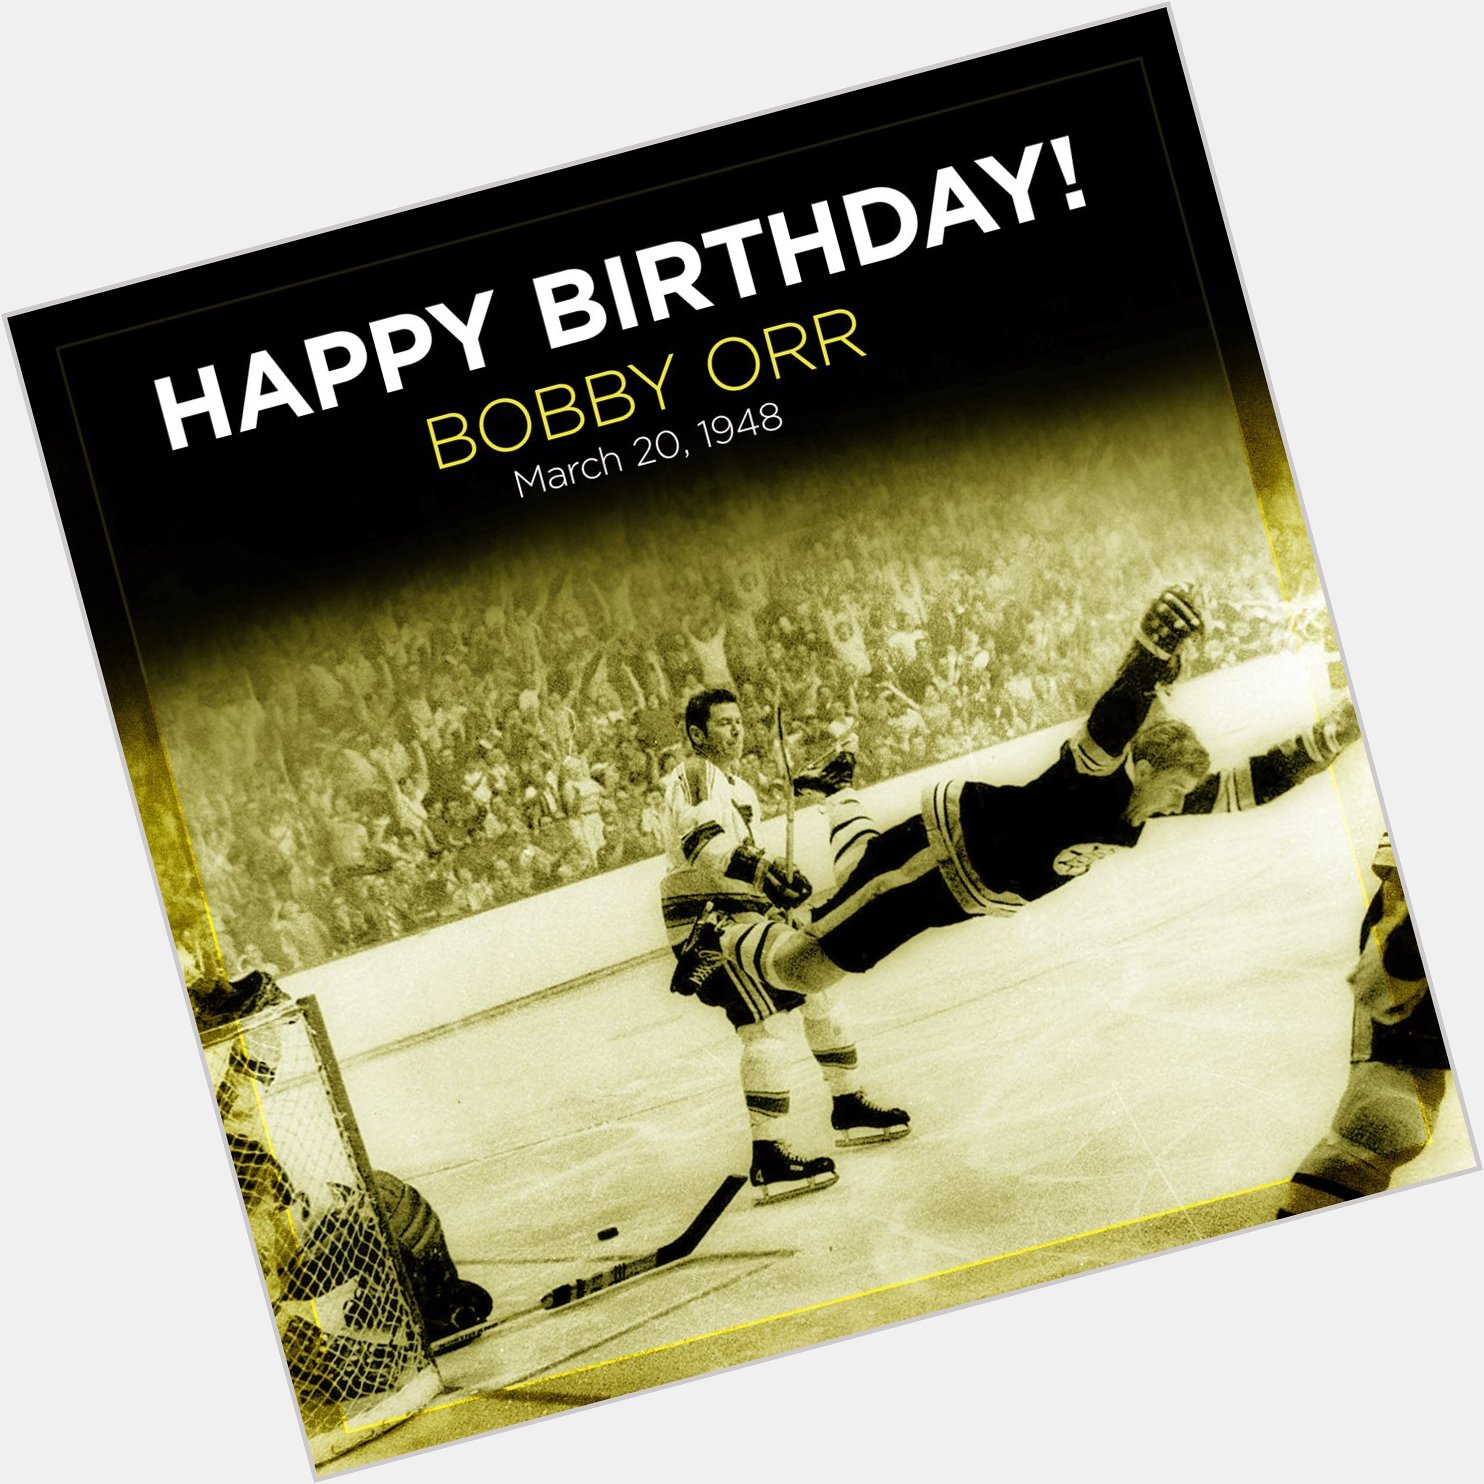 Wish Bobby Orr a happy birthday in the replies! 